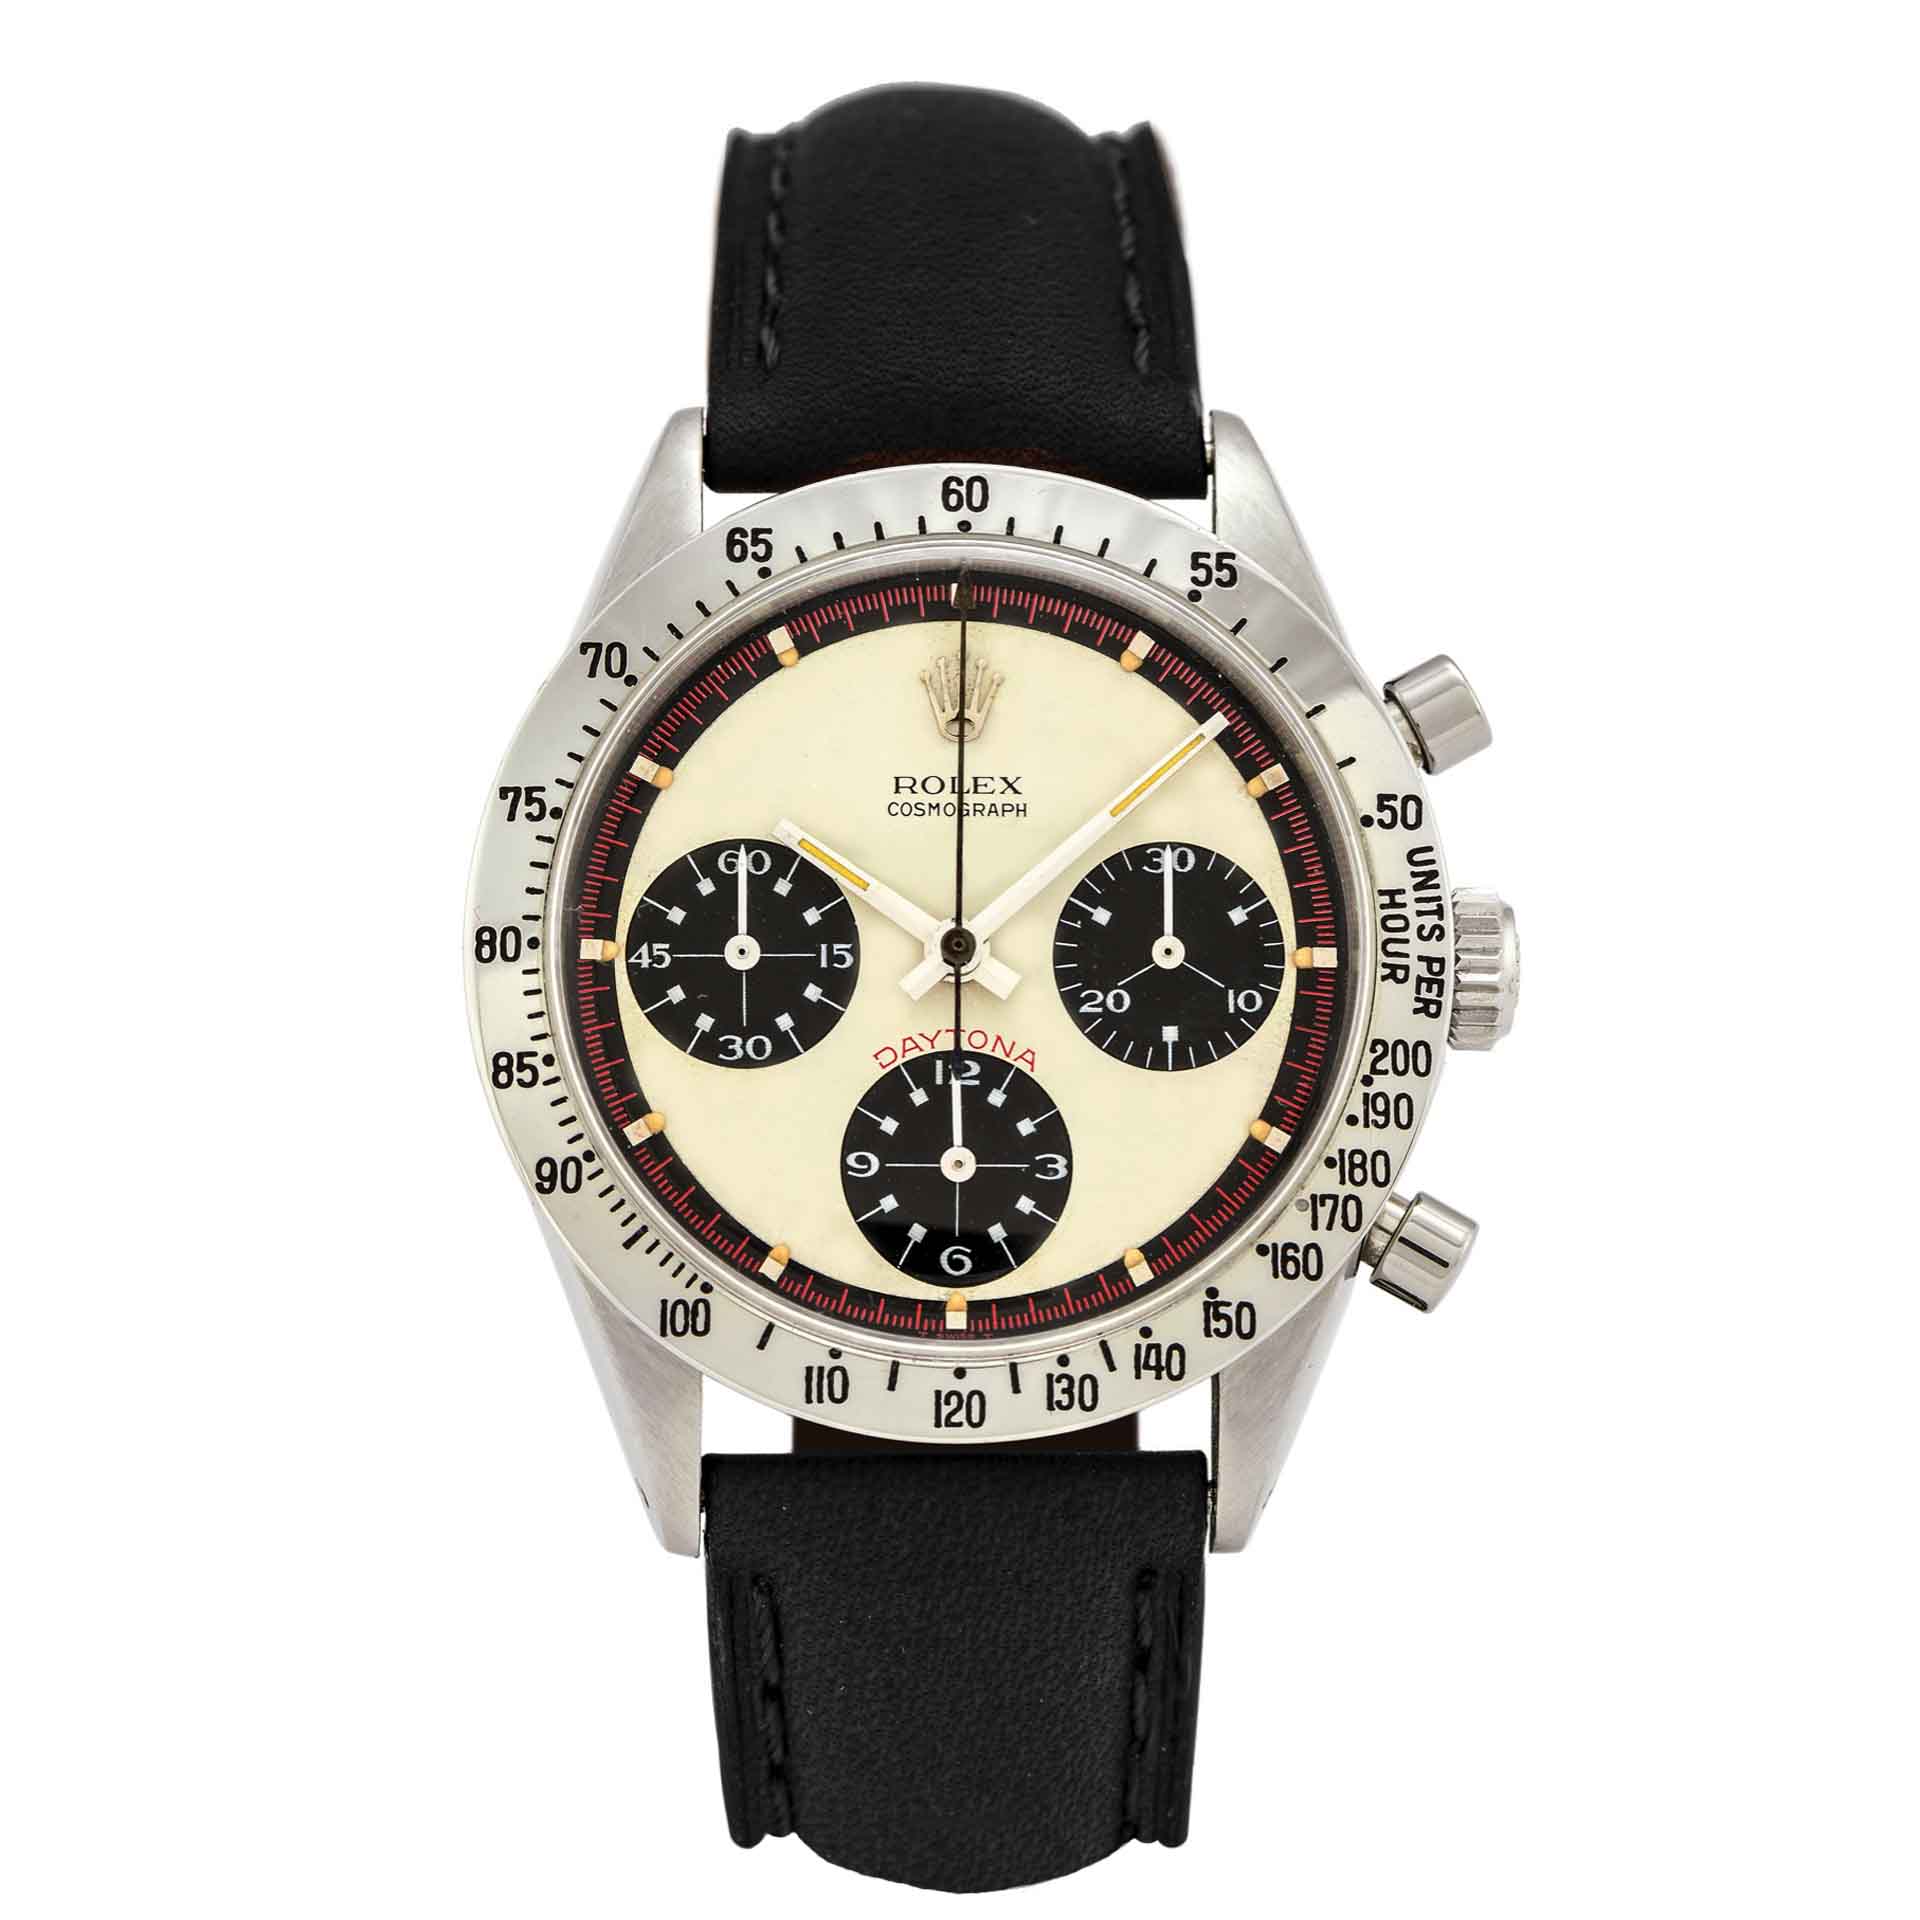 Rolex Cosmograph Daytona Ref. 6239 Paul Newman from 1968 - most expensive watch in the world